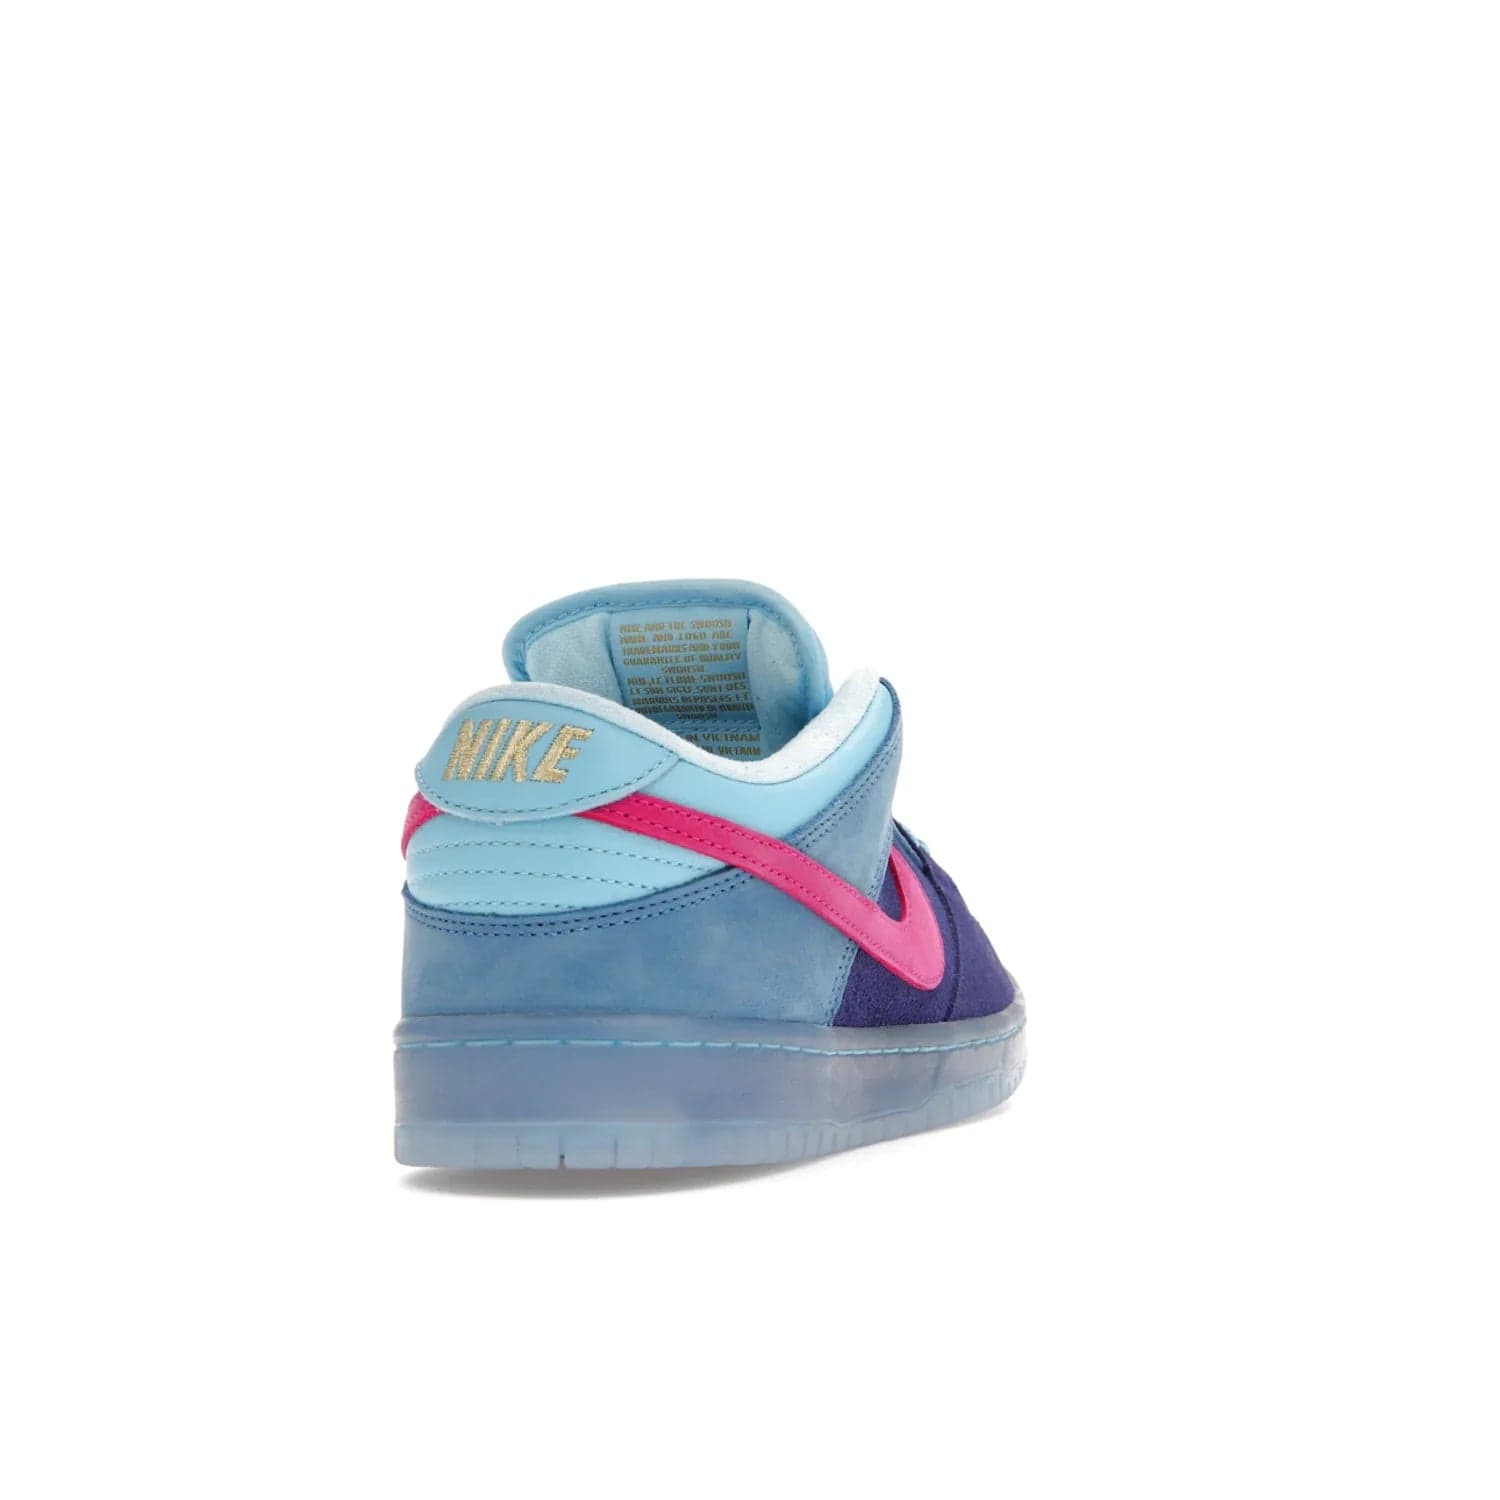 Nike SB Dunk Low Run The Jewels - Image 30 - Only at www.BallersClubKickz.com - The Nike SB Dunk Low Run The Jewels pays tribute to the Run the Jewels 3 album cover. It features a blue suede upper with pink suede accents, gold branding and 3 lace sets. RTJ insoles complete this limited edition sneaker. Get it now for your shoe collection.